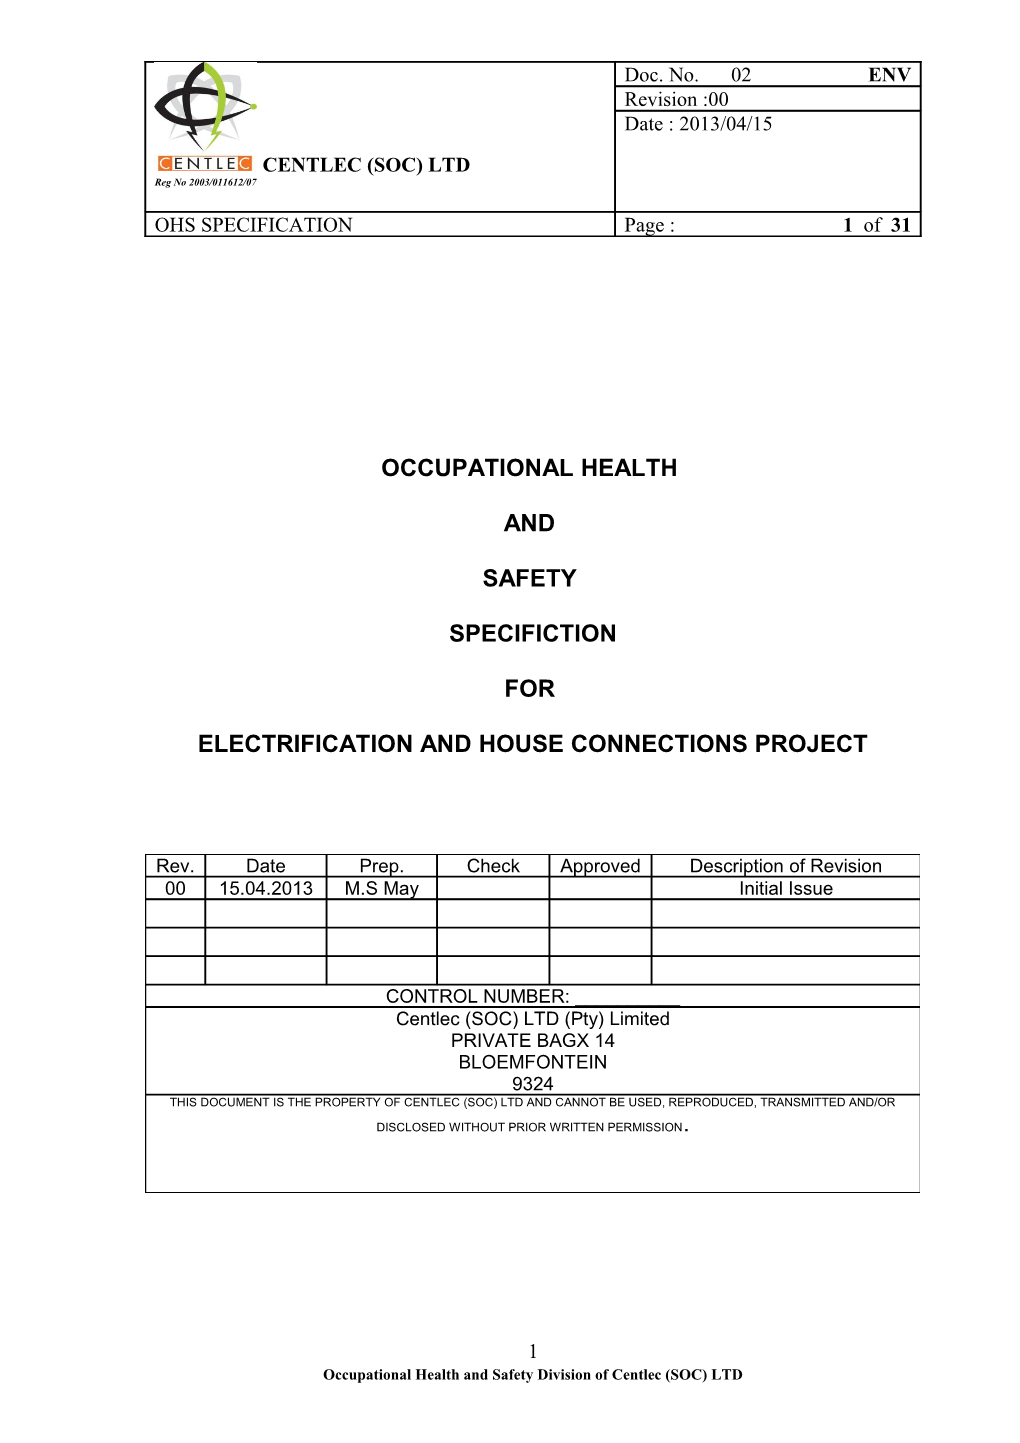 Occupational Health and Safety Specifications